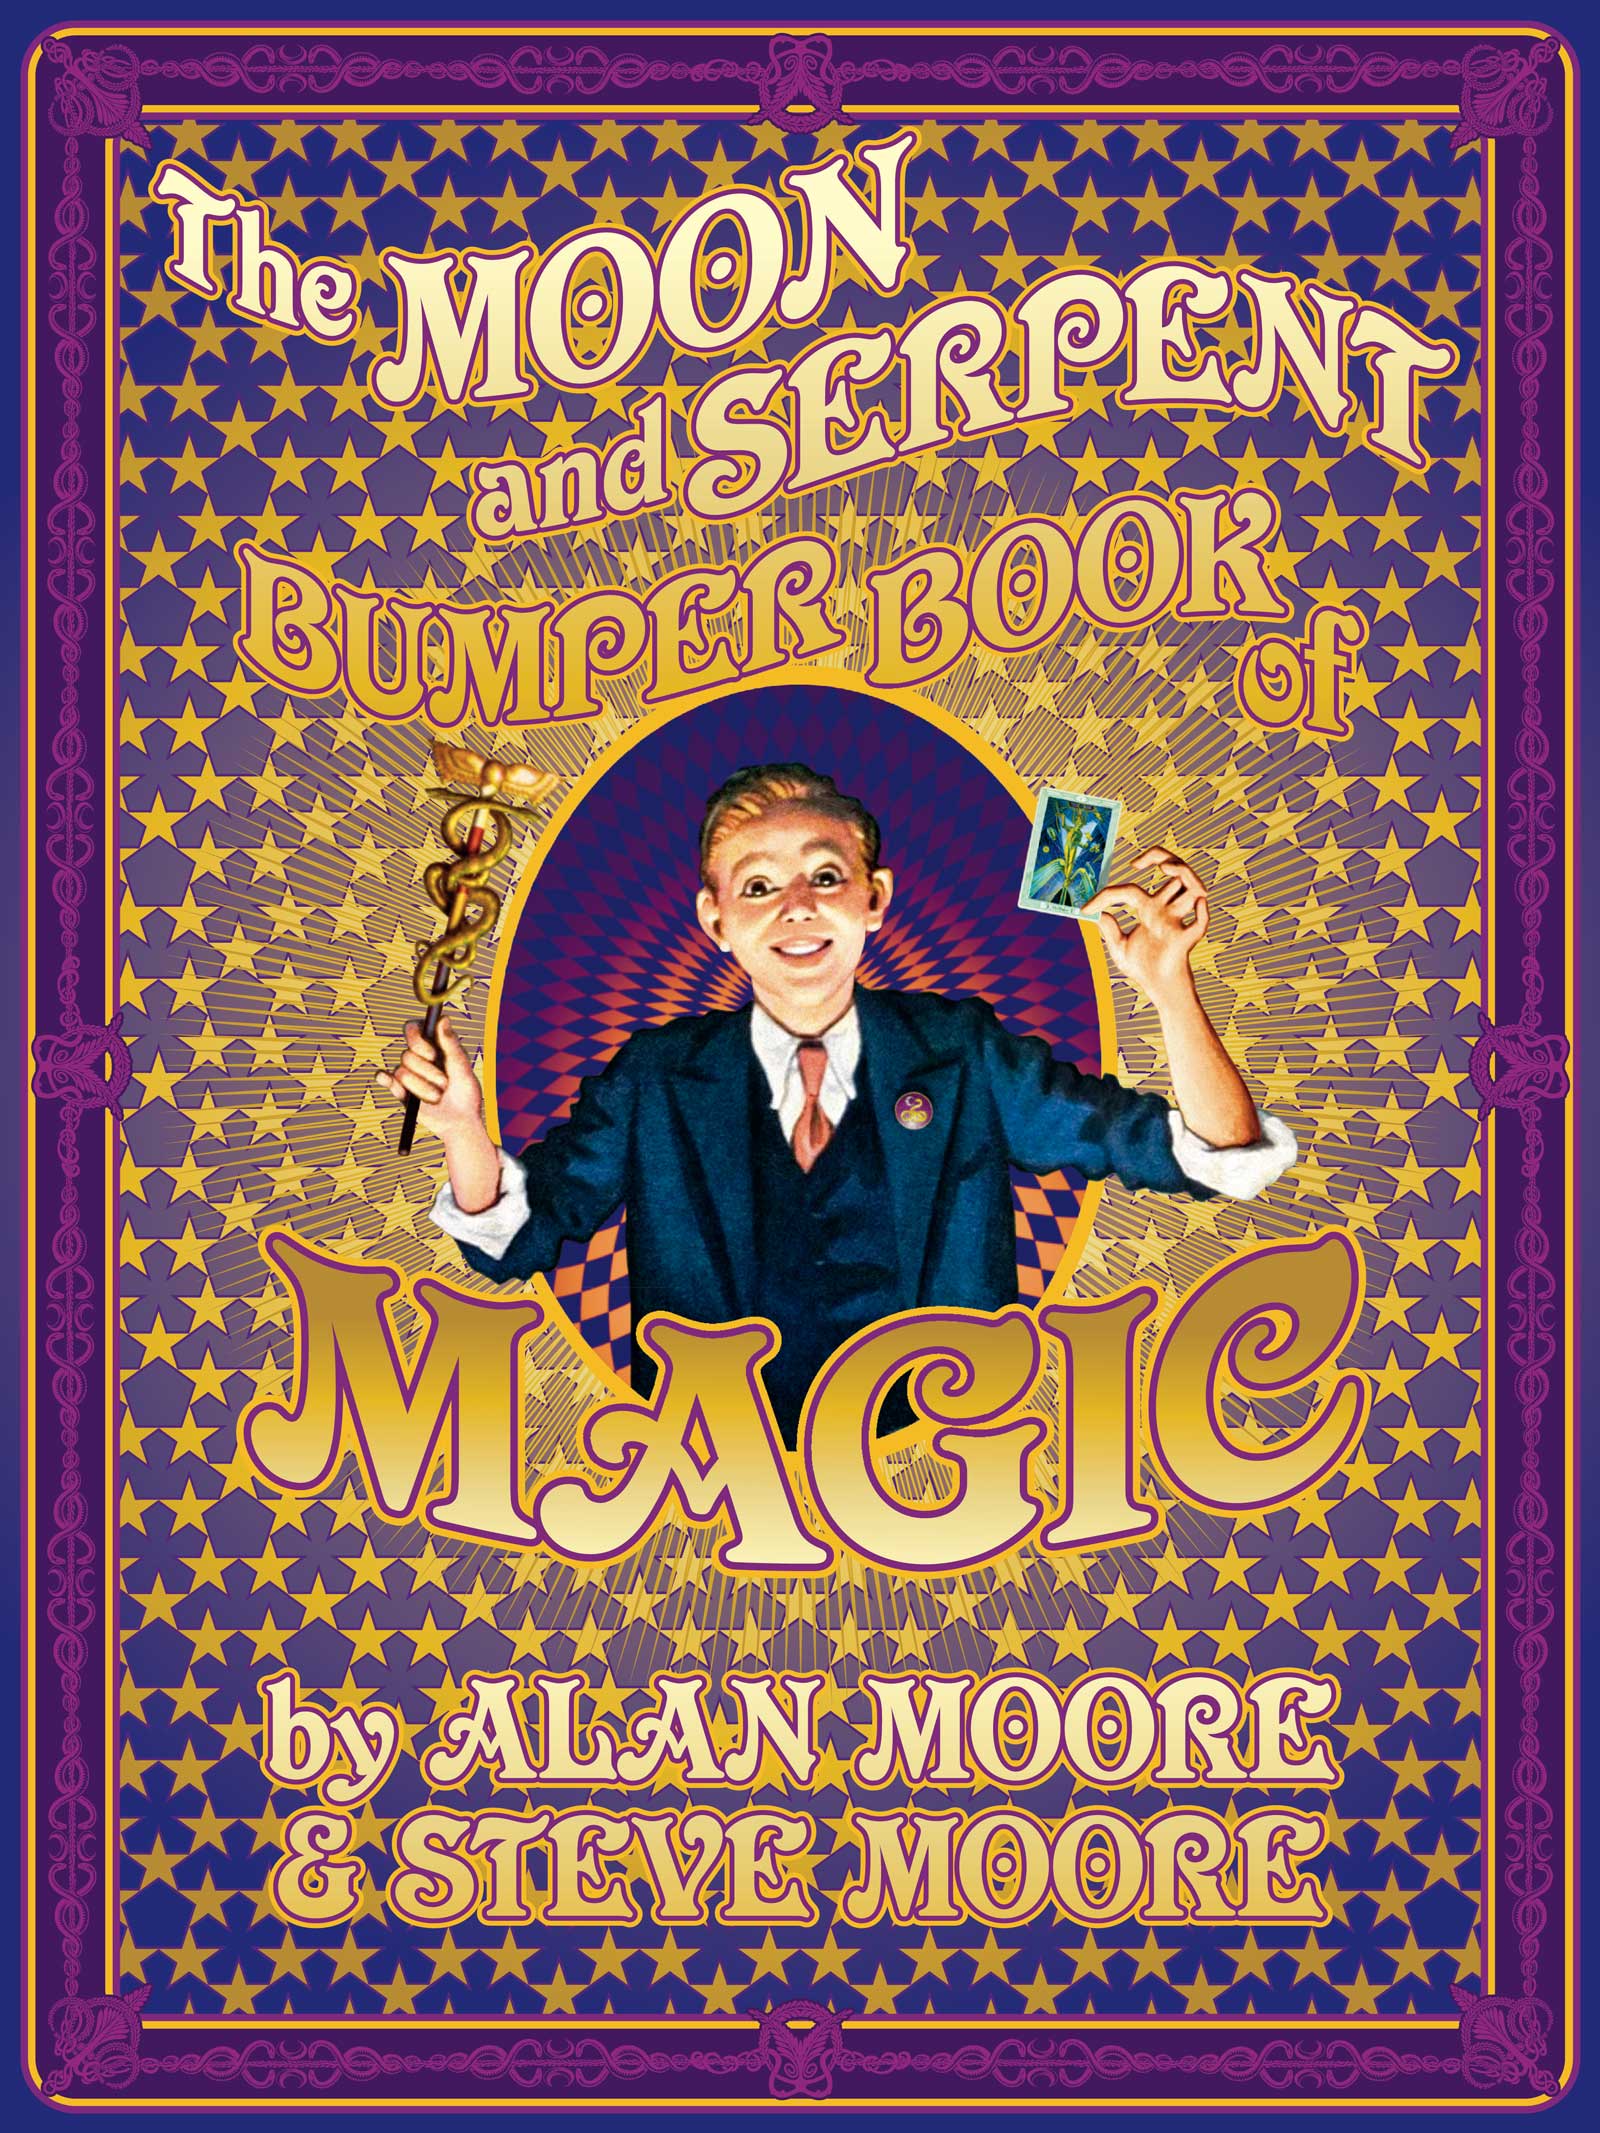 The Moon and Serpent Bumper Book of Magic by Alan Moore and Steve Moore